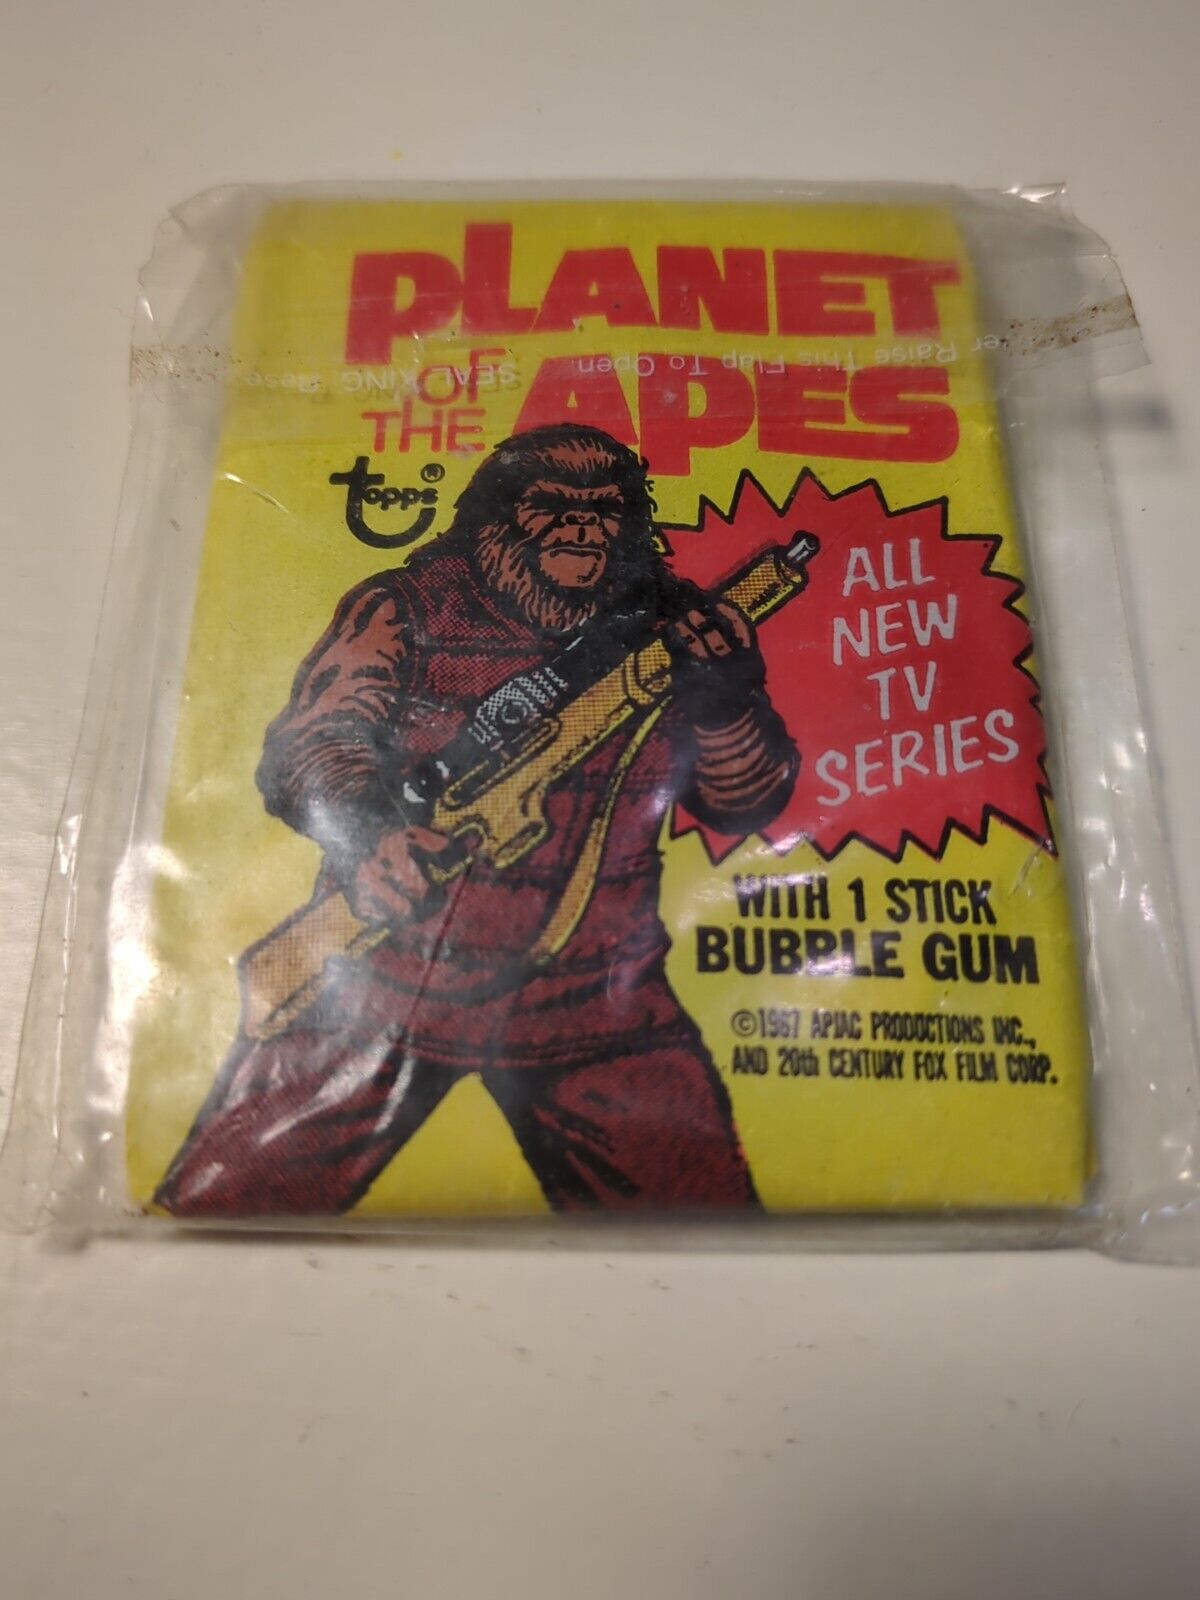 1975 Topps Planet Of The Apes TV SHOW Topps Vintage Wax Pack Card